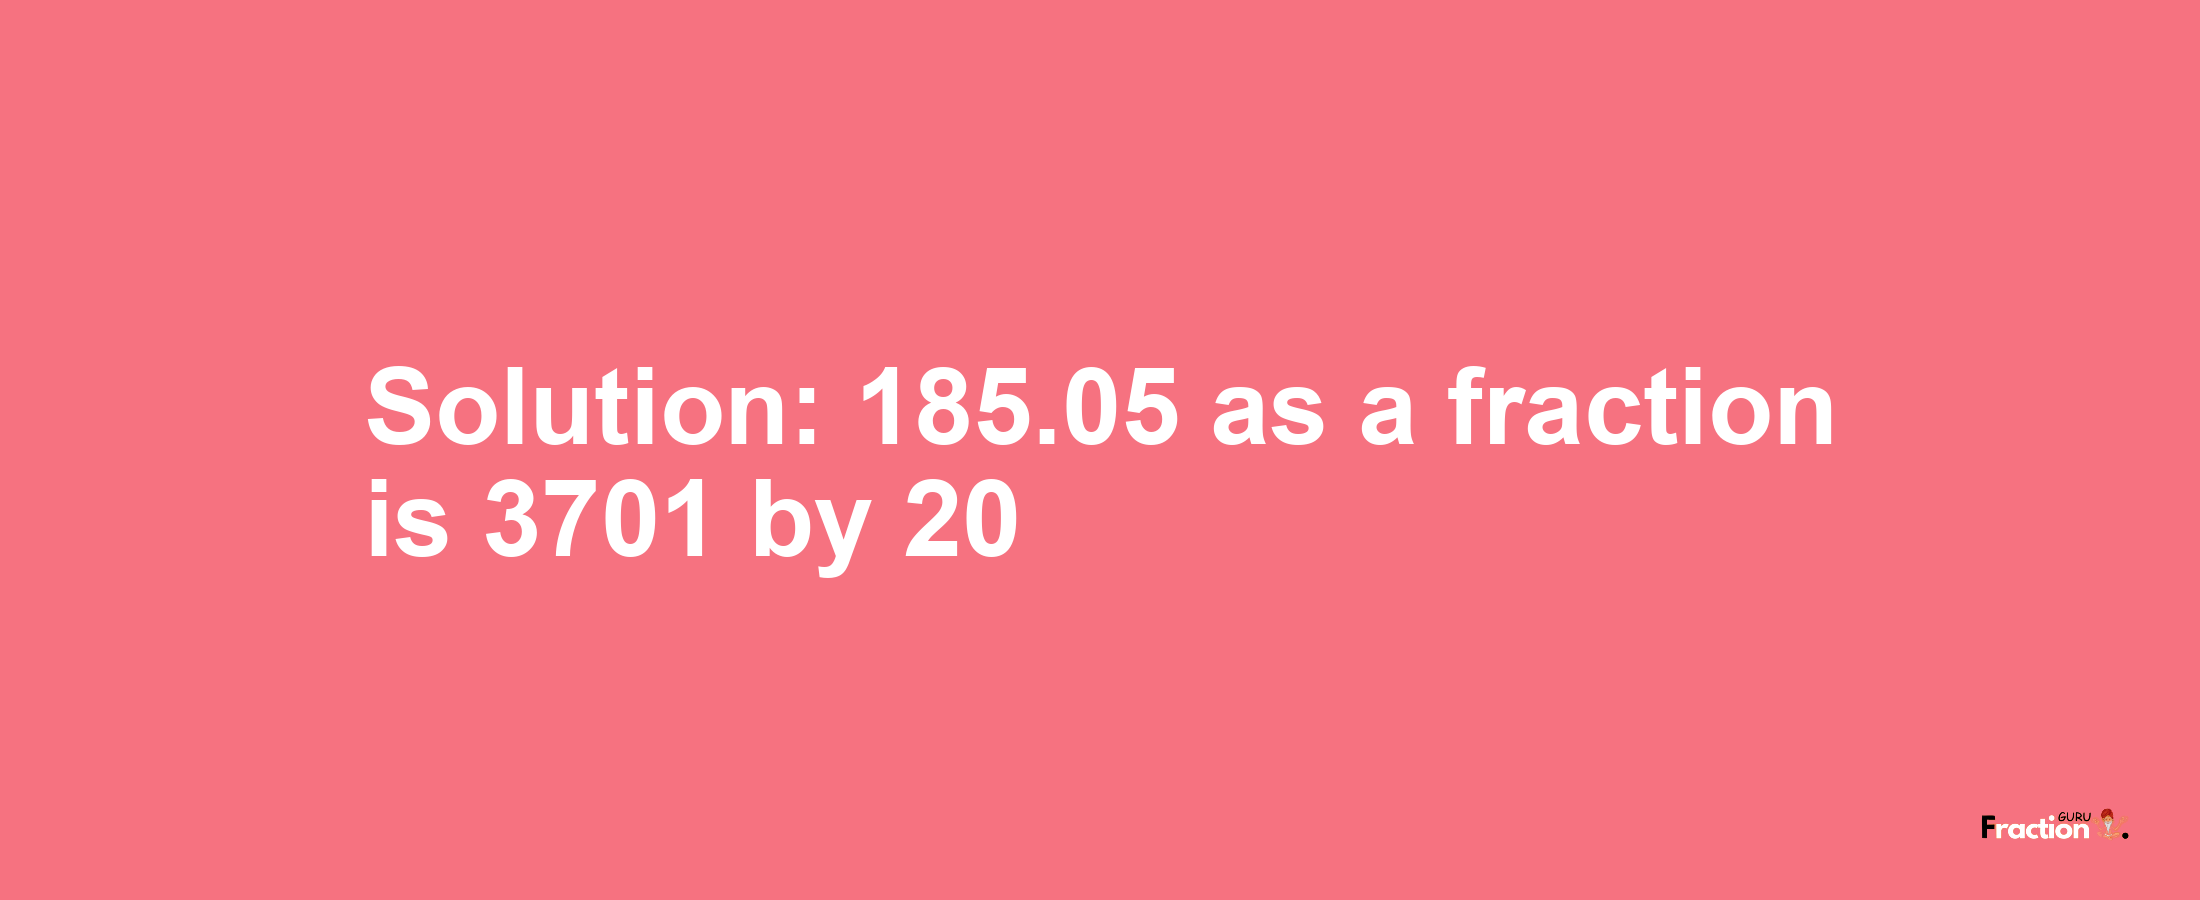 Solution:185.05 as a fraction is 3701/20